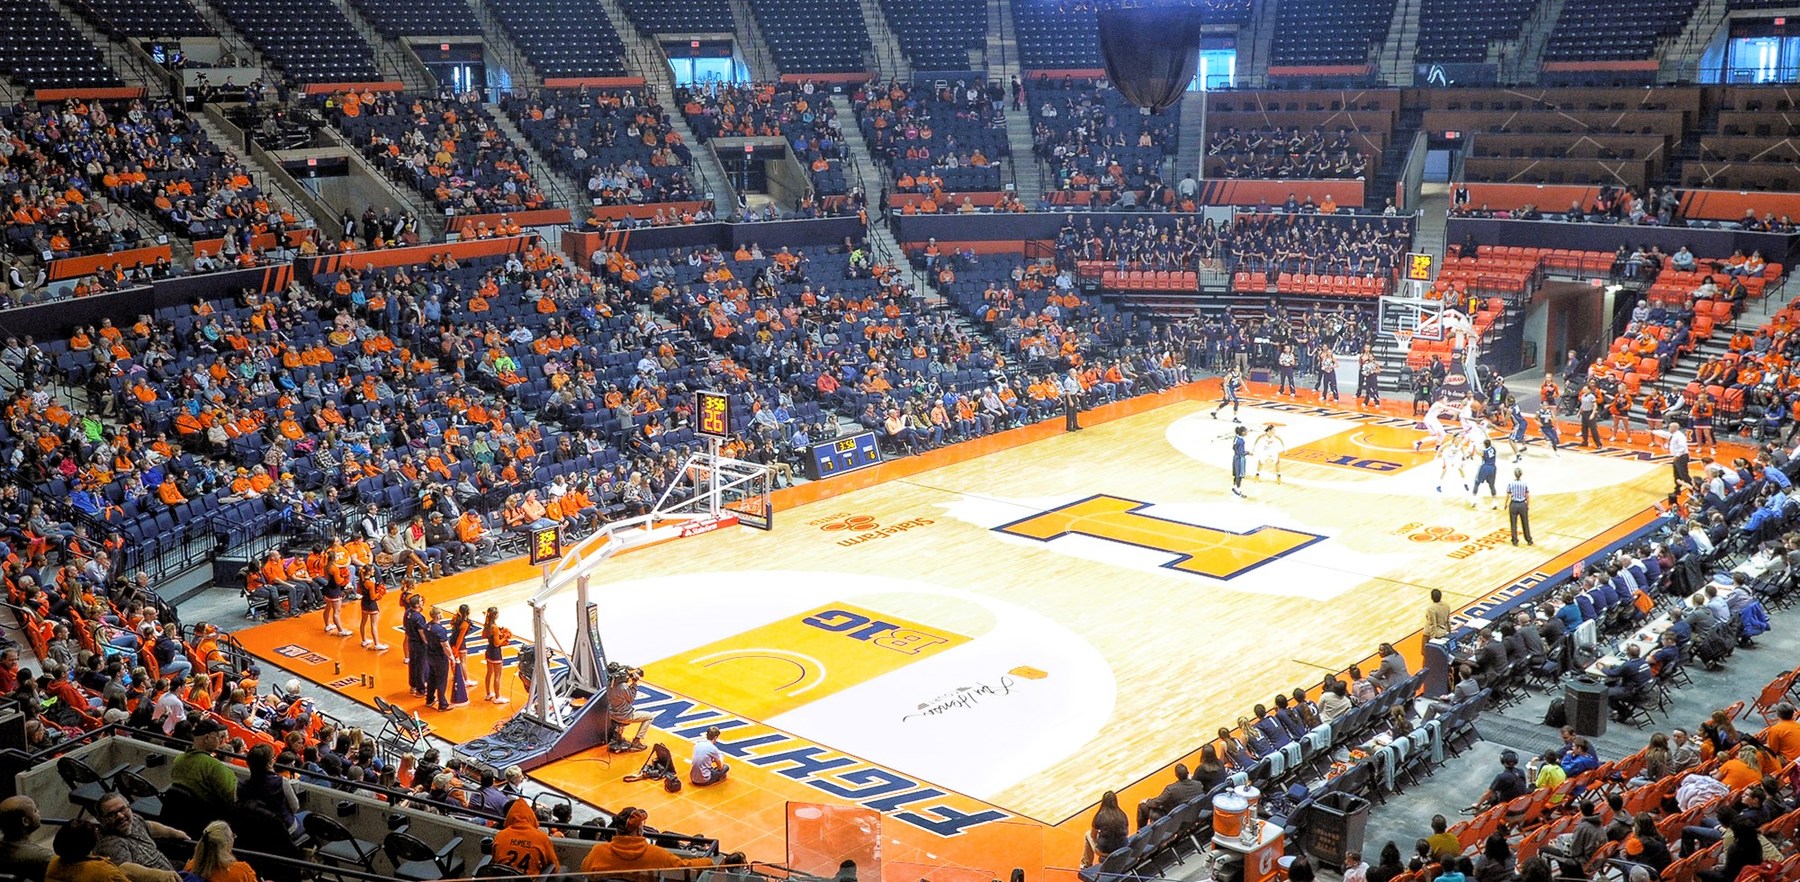 State Farm Center during a Women's Basketball game